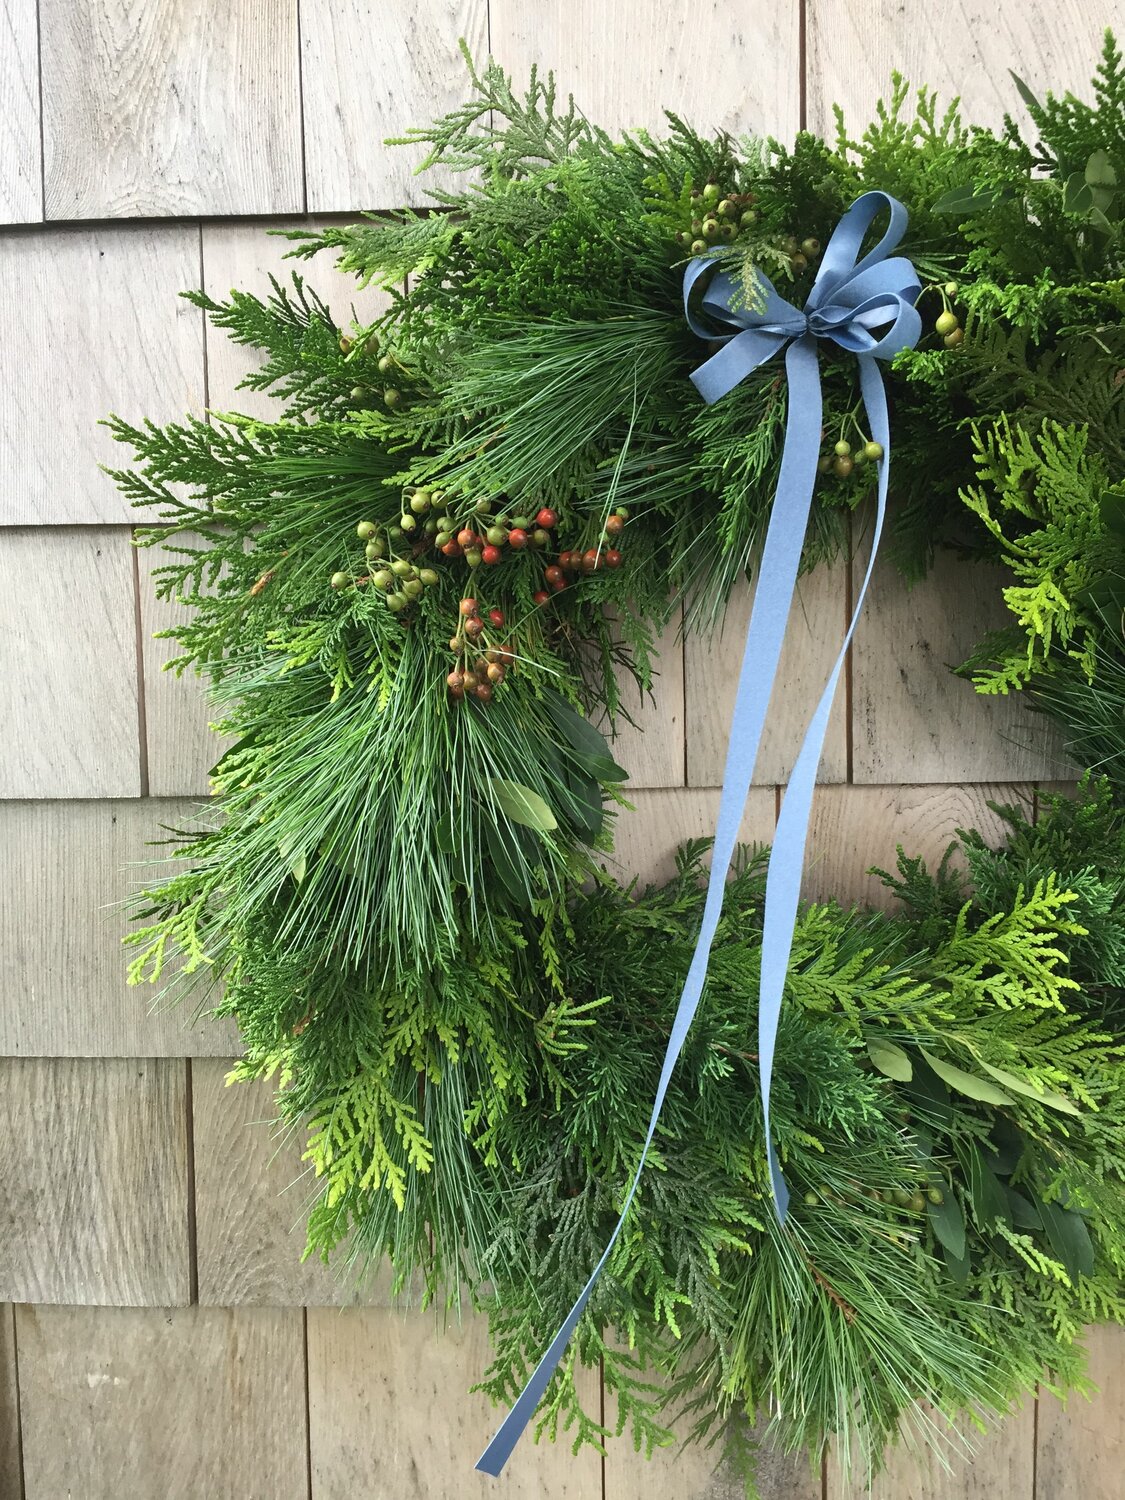 With a wire frame, a few green clippings and some ribbon, anyone can create their own custom wreath.